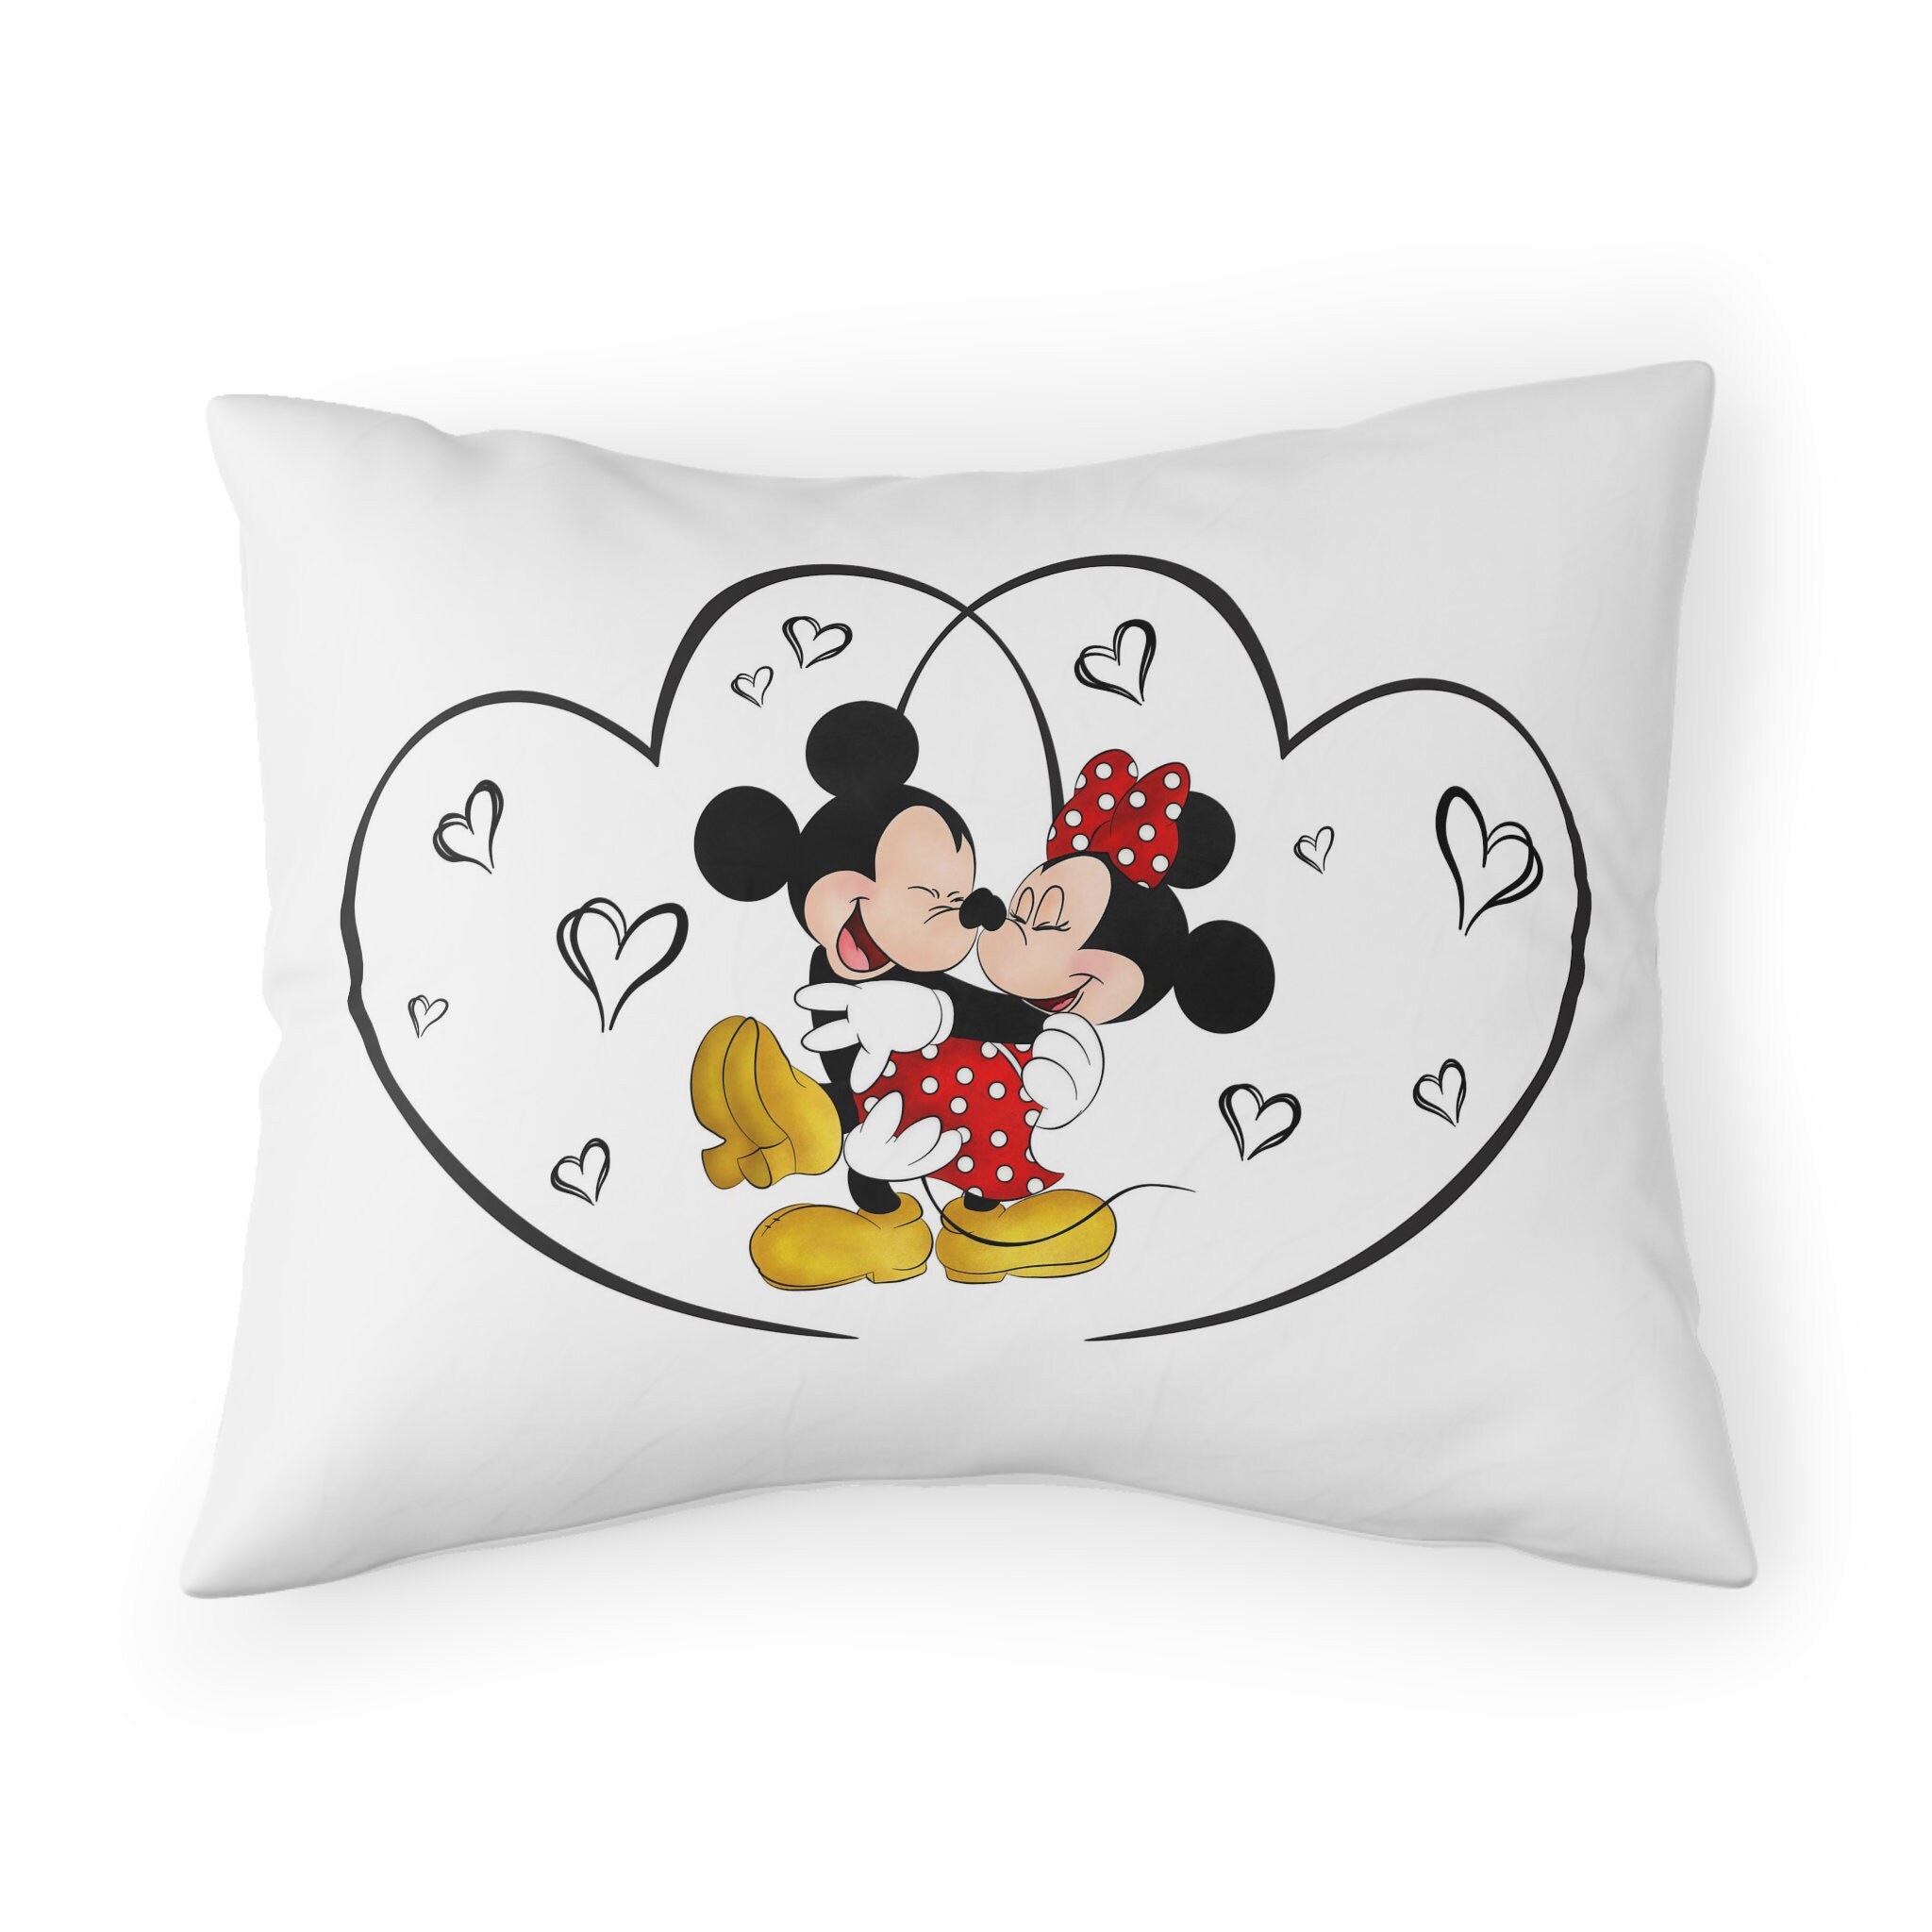 Disney Bedding Sets, Happily Ever After, Mickey & Minnie Mouse Love Bedroom Bedding Set